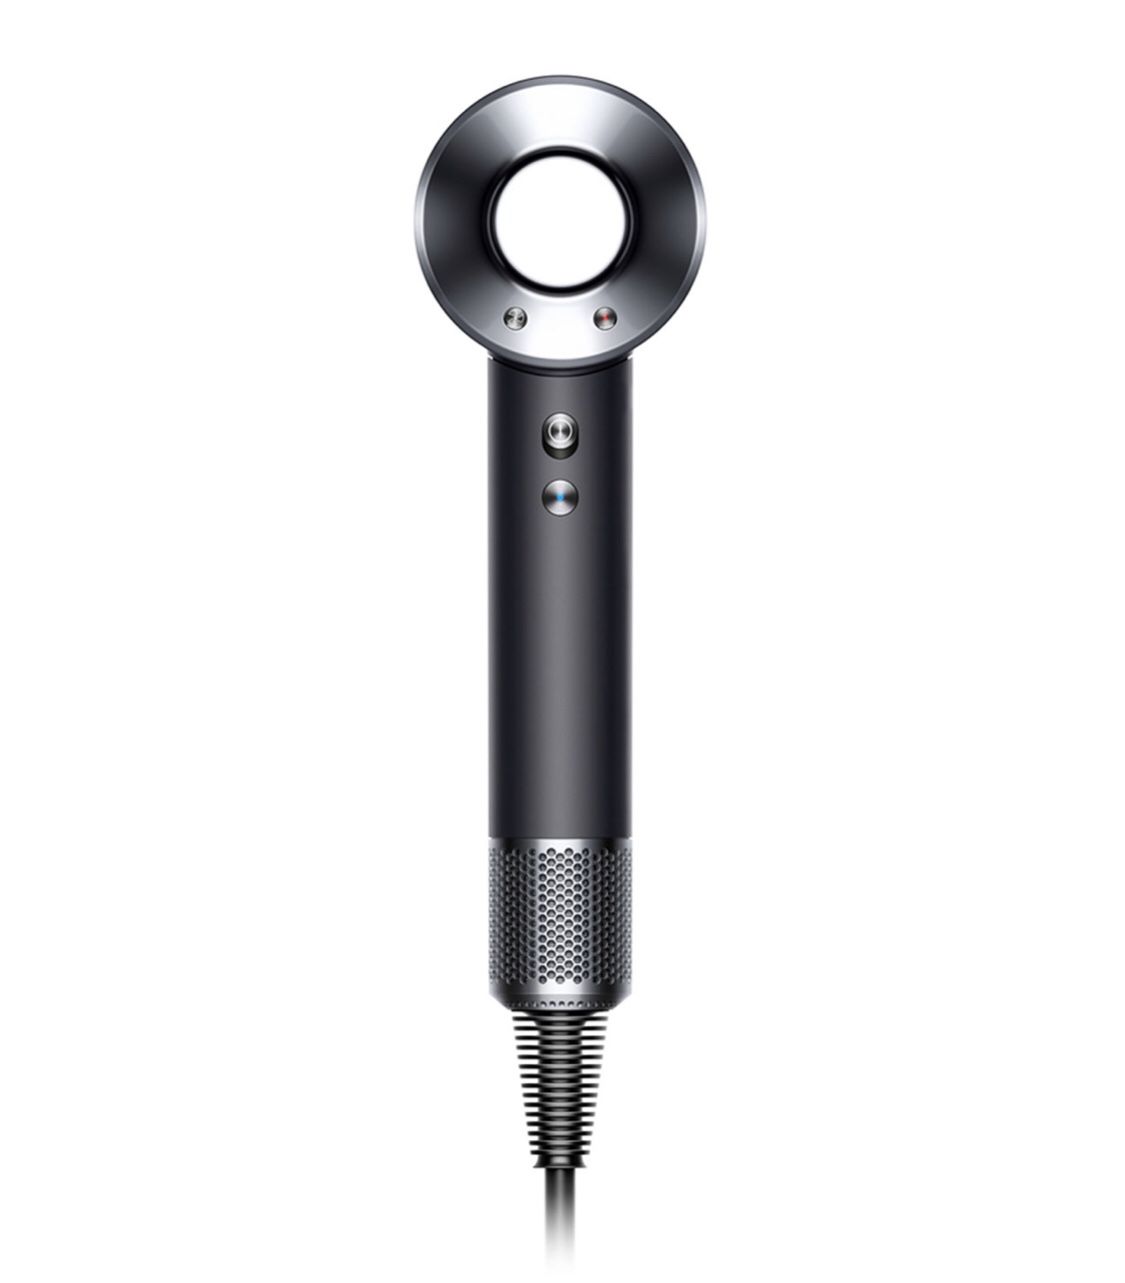 DYSON SUPERSONIC HAIR DRYER - Lightly Used, Like New!